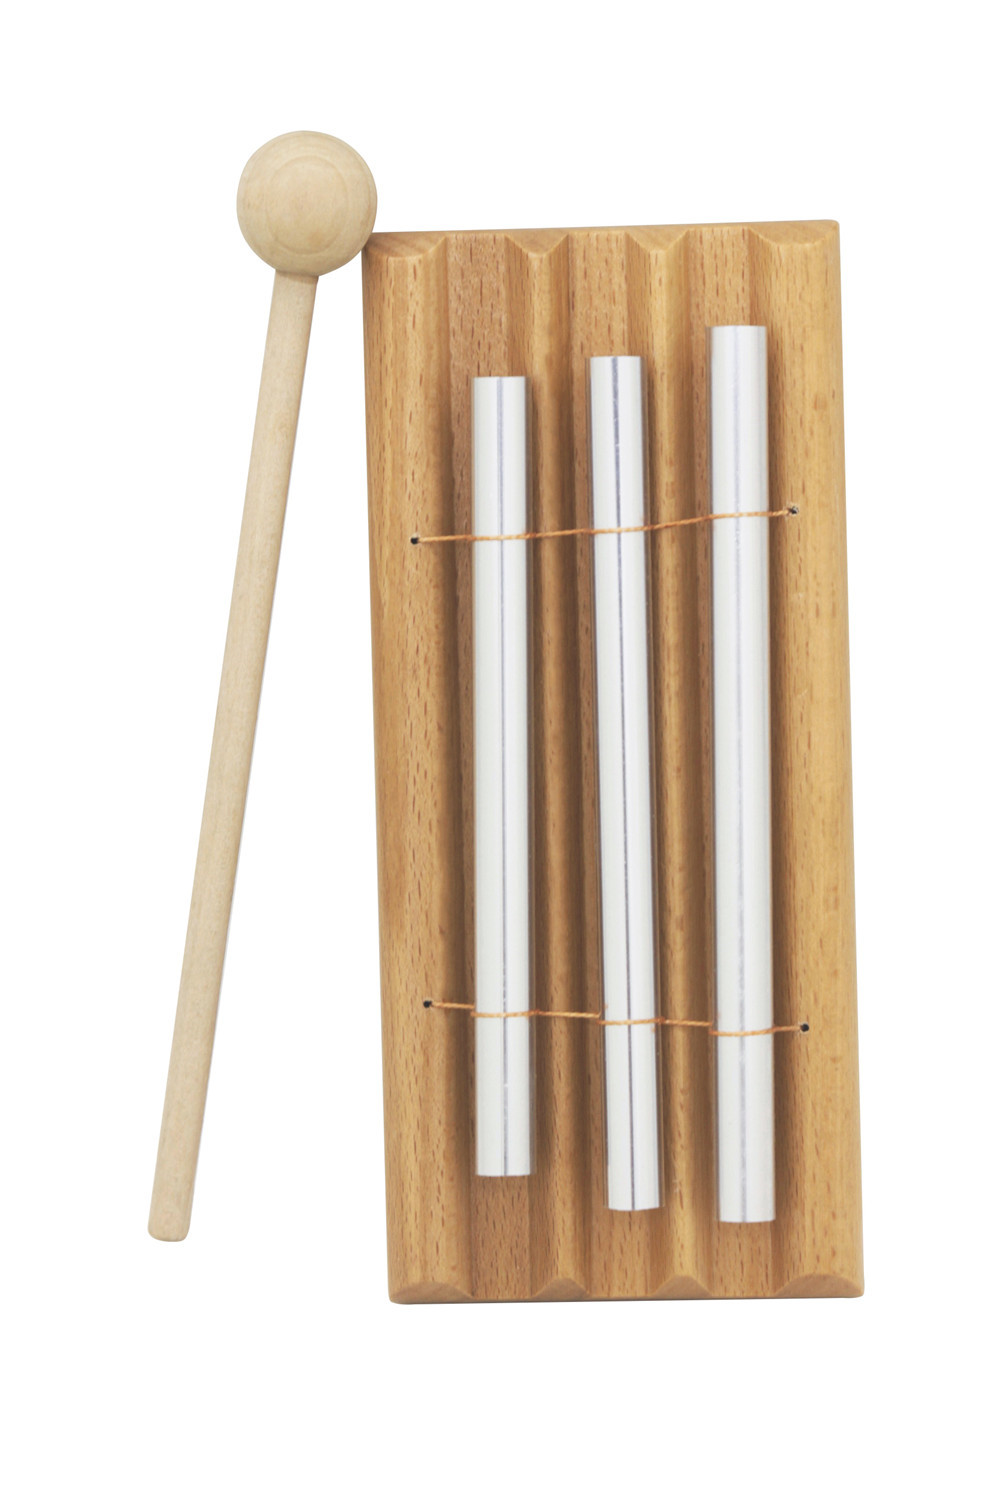 Energy Chime Three Tone with Mallet Exquisite Music Toy Percussion Instrument